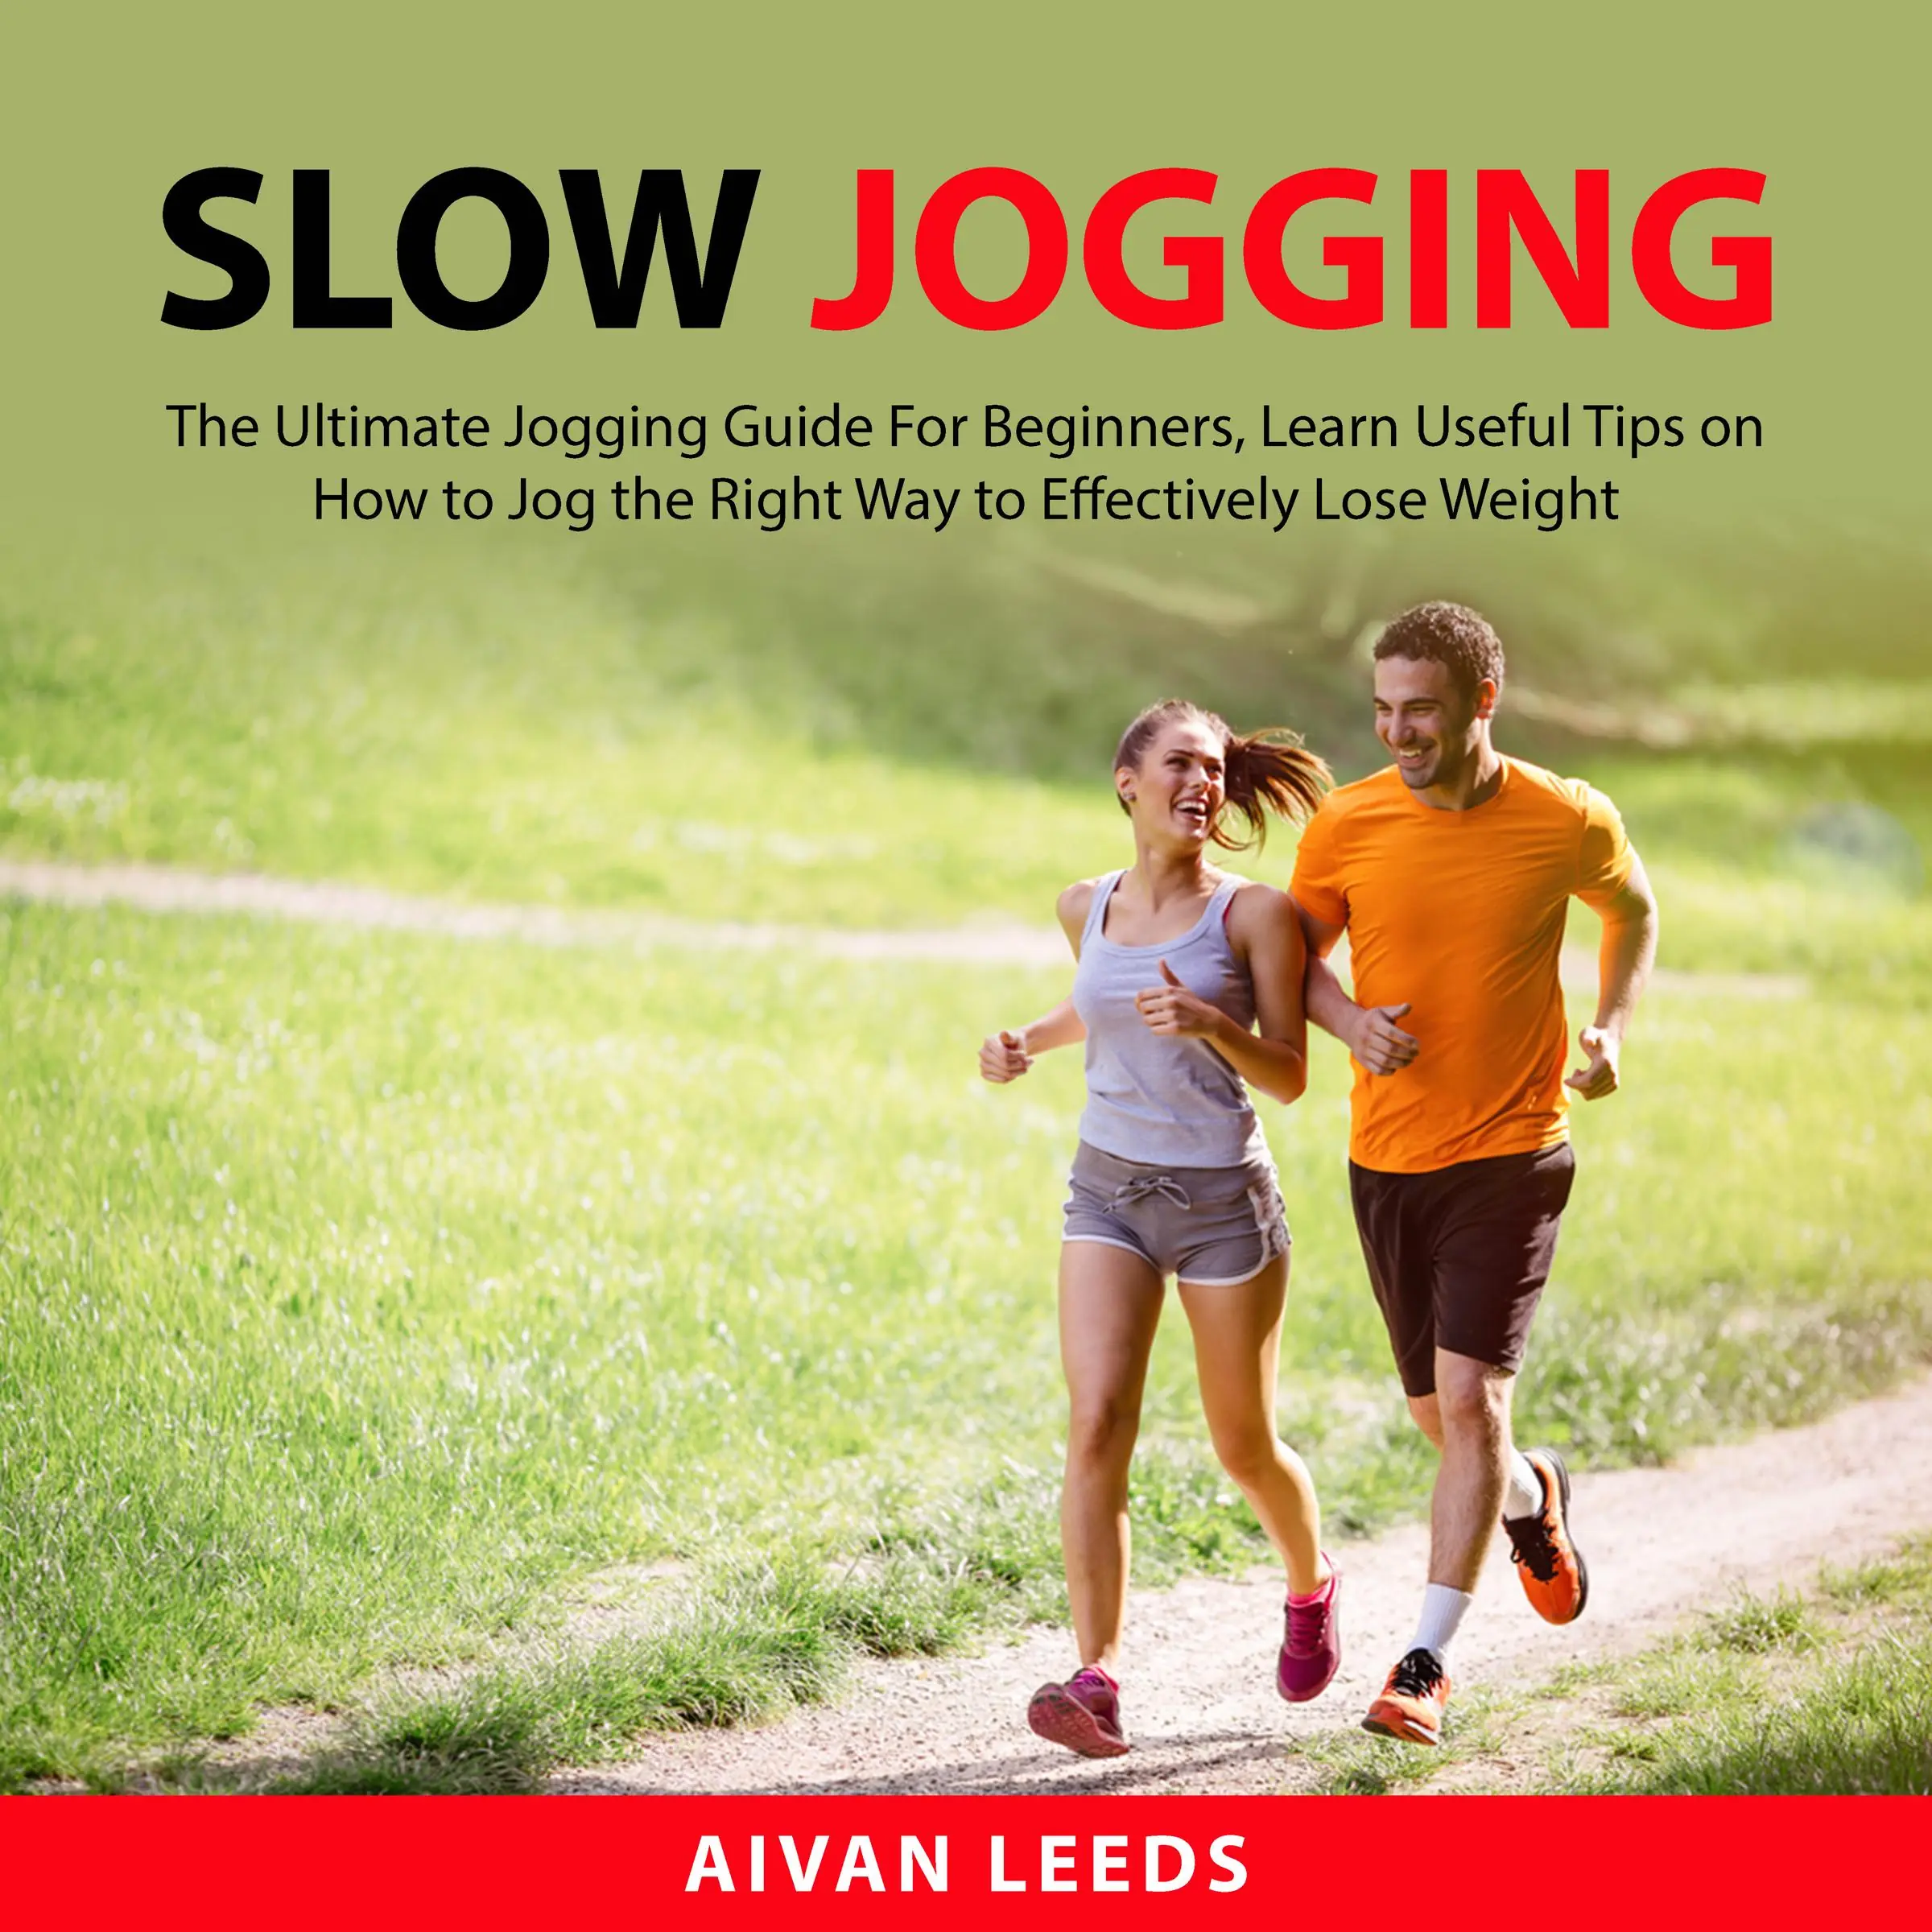 Slow Jogging: The Ultimate Jogging Guide For Beginners, Learn Useful Tips on How to Jog the Right Way to Effectily Lose Weight by Aivan Leeds Audiobook